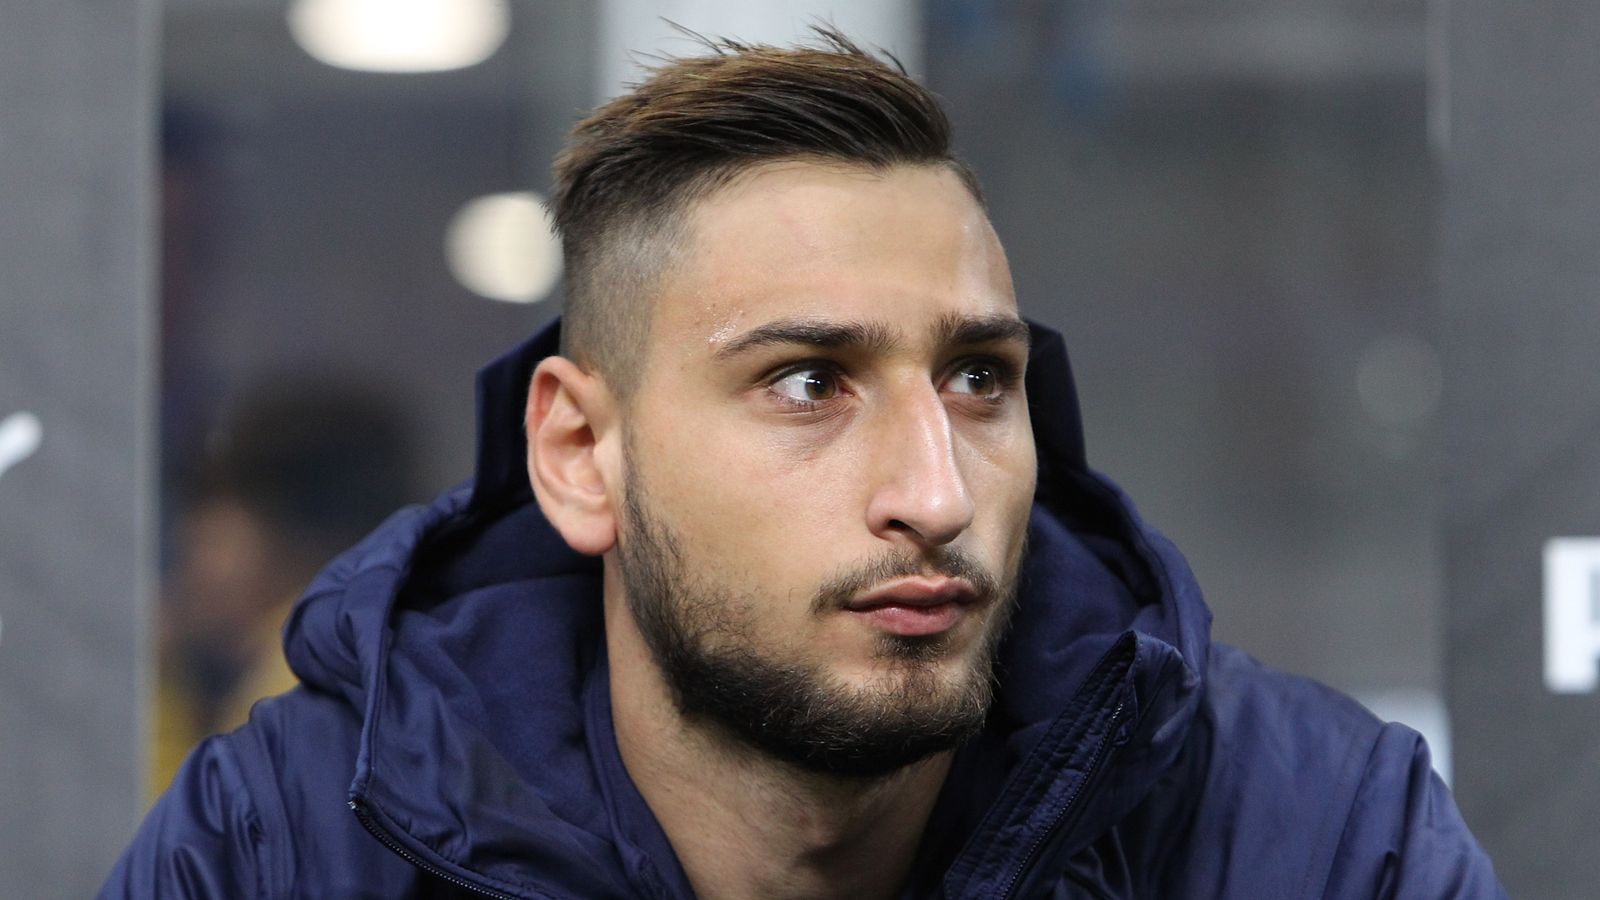 Gianluigi Donnarumma denies being pressured into signing AC Milan contract | Football News | Sky ...